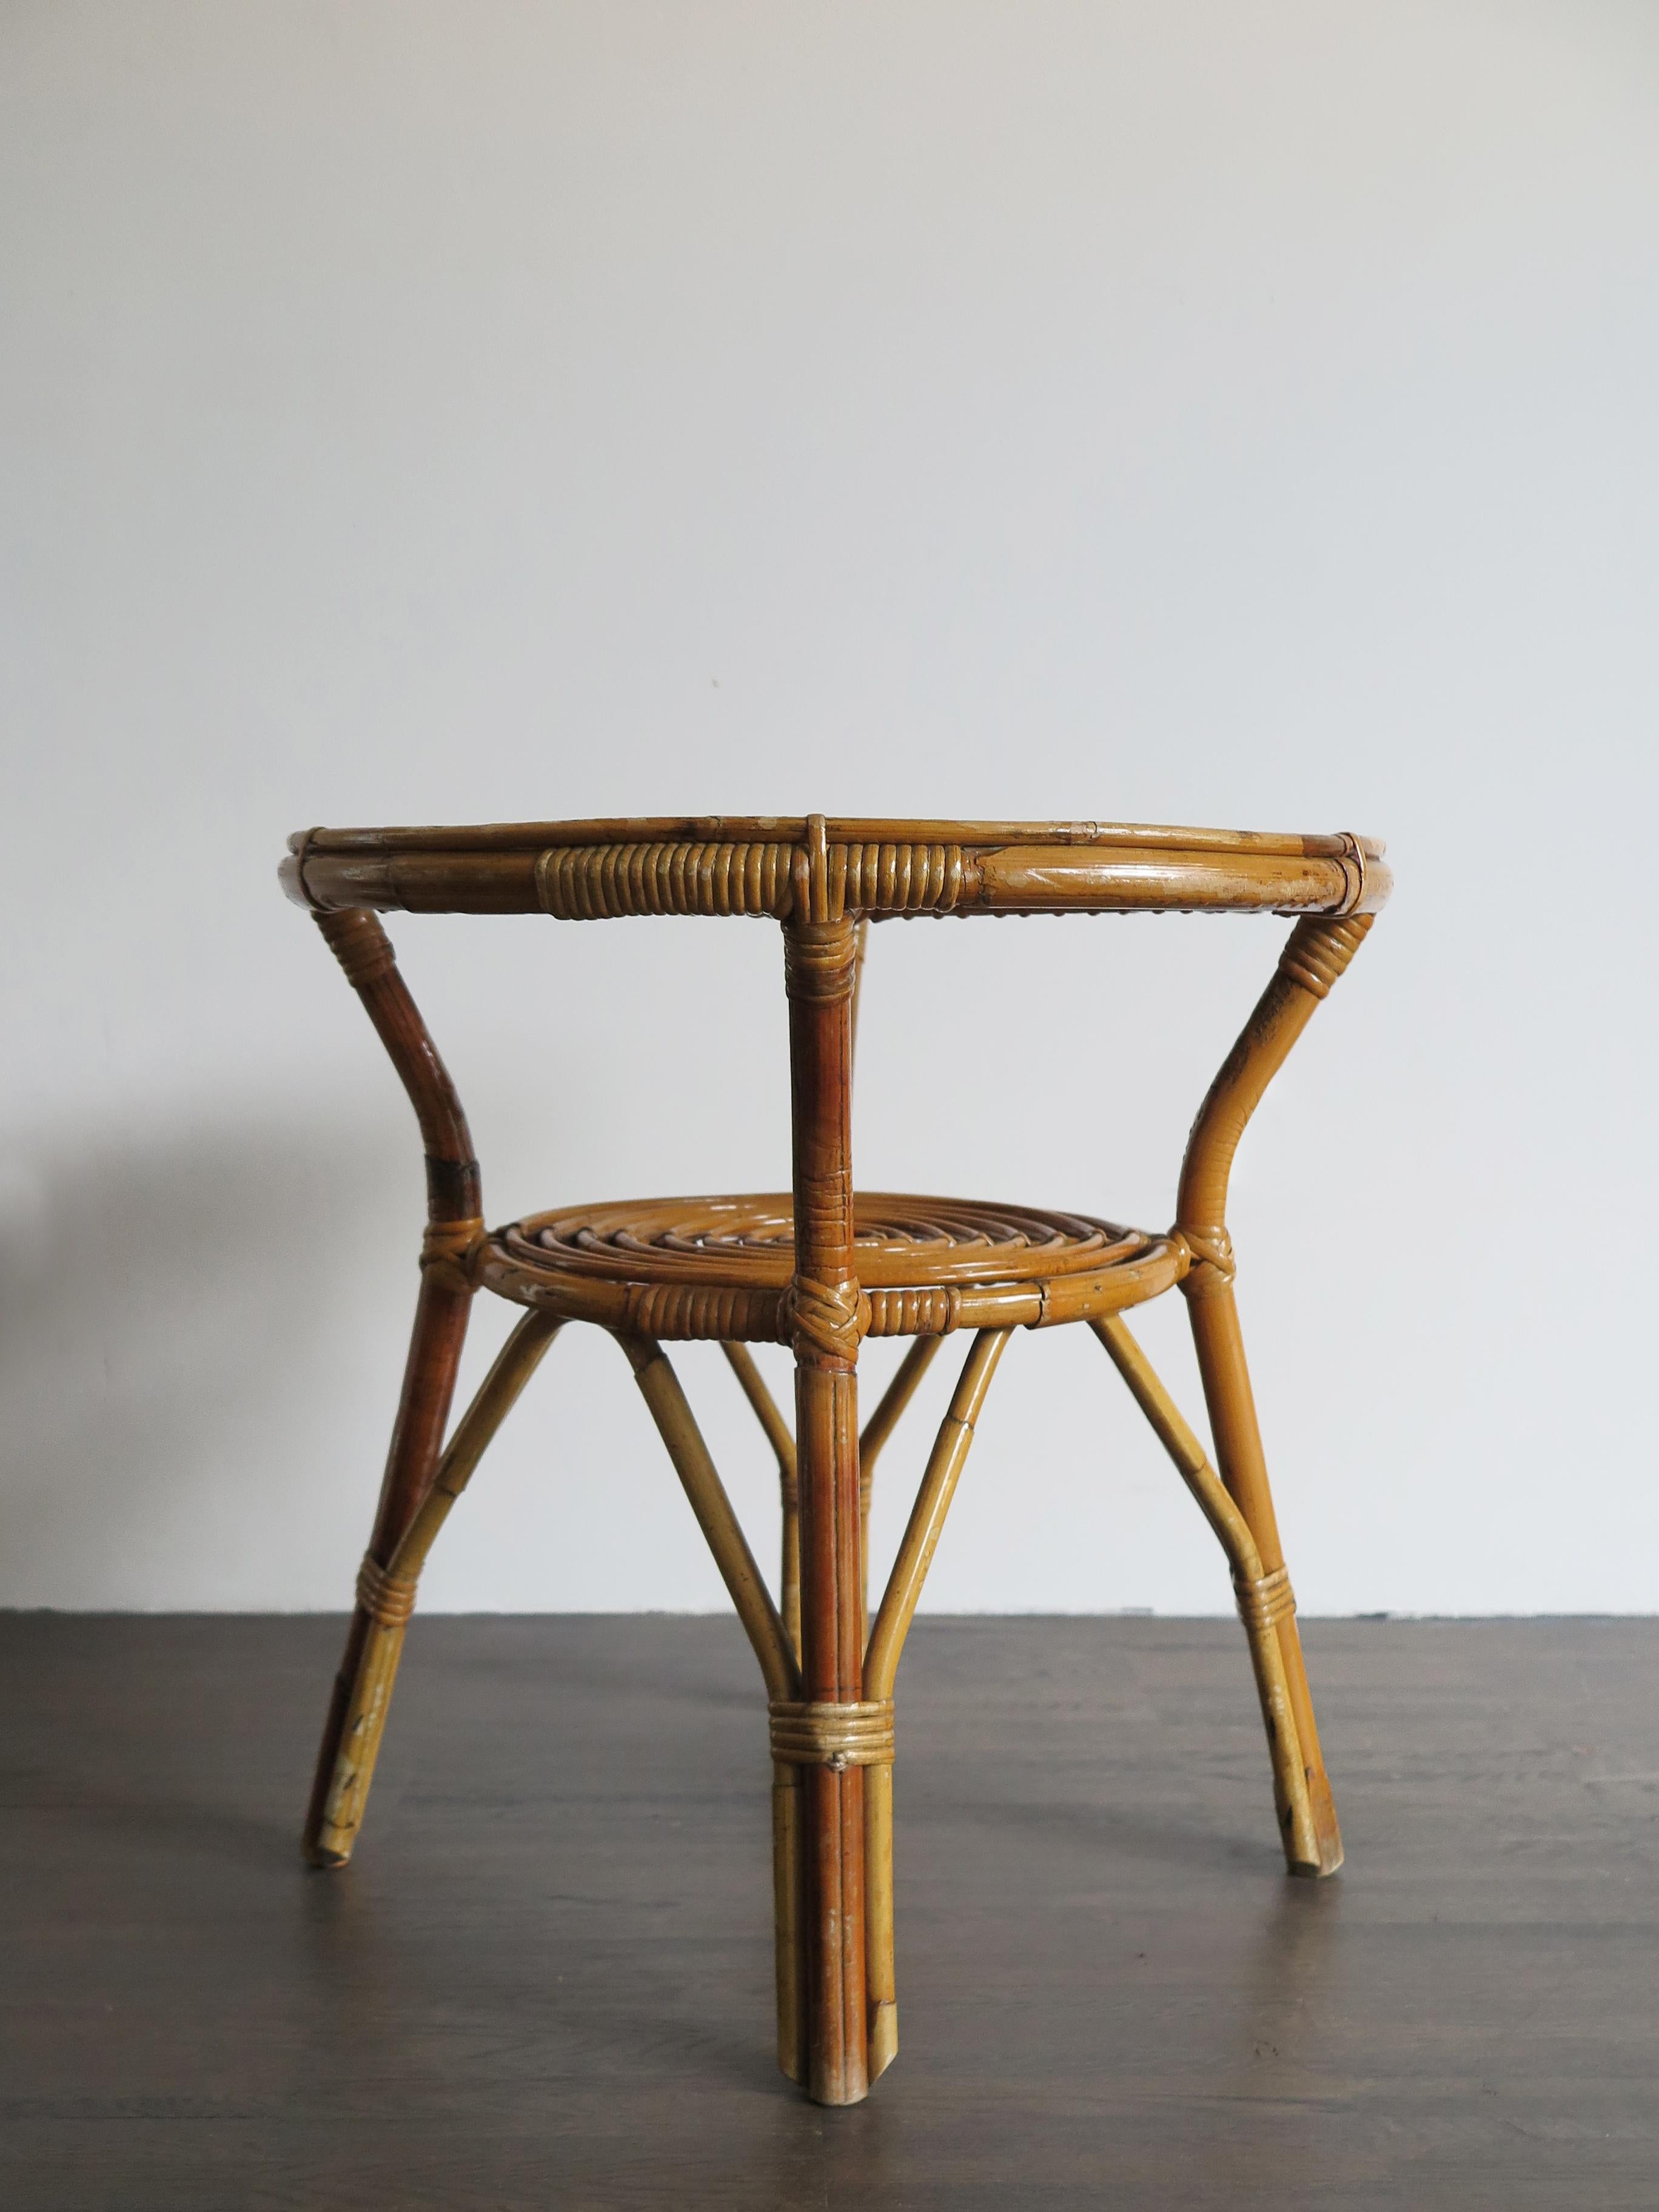 Italian Mid-Century Modern design rattan bamboo sofa table or coffe table in the style of Tito Agnoli Bonacina, circa 1950s.
Please note that the item is original of the period and this shows normal signs of age and use.